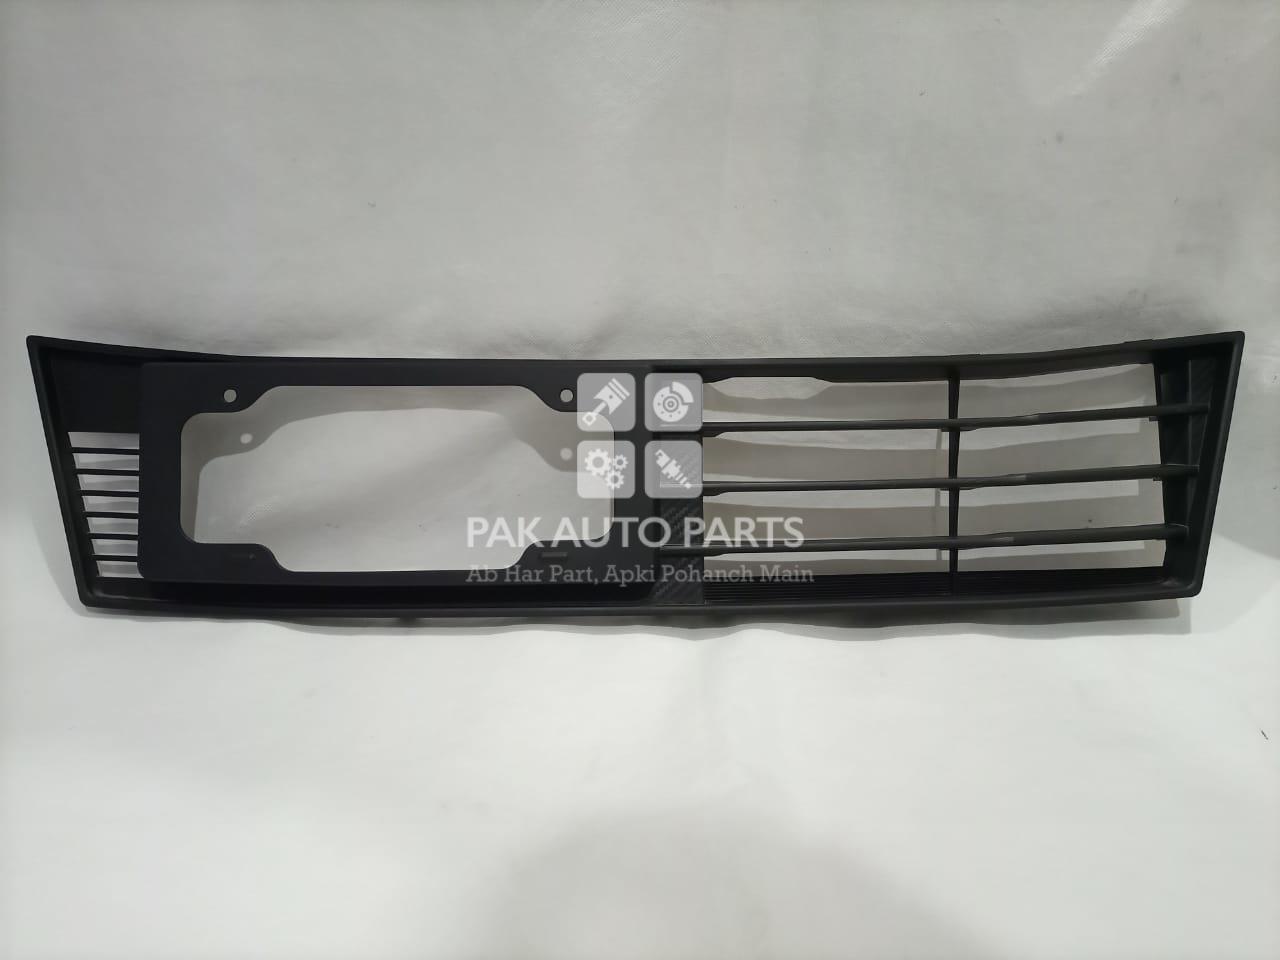 Picture of Nissan Dayz Highway Star 2018 Bumper Lower Grill